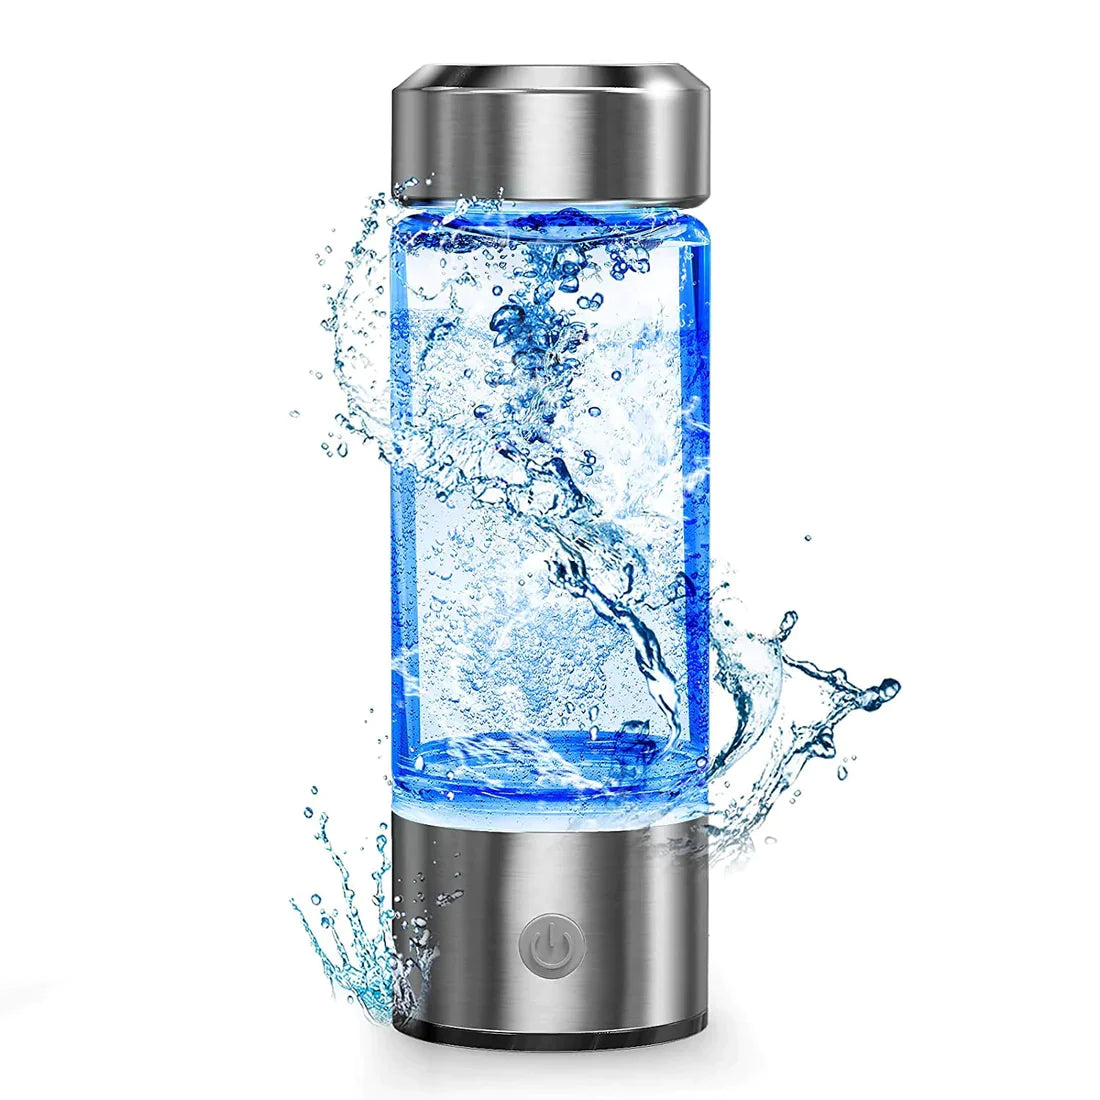 Hydrogen Water Bottle - Stay Hydrated with Refreshing Hydrogen-Enriched Water